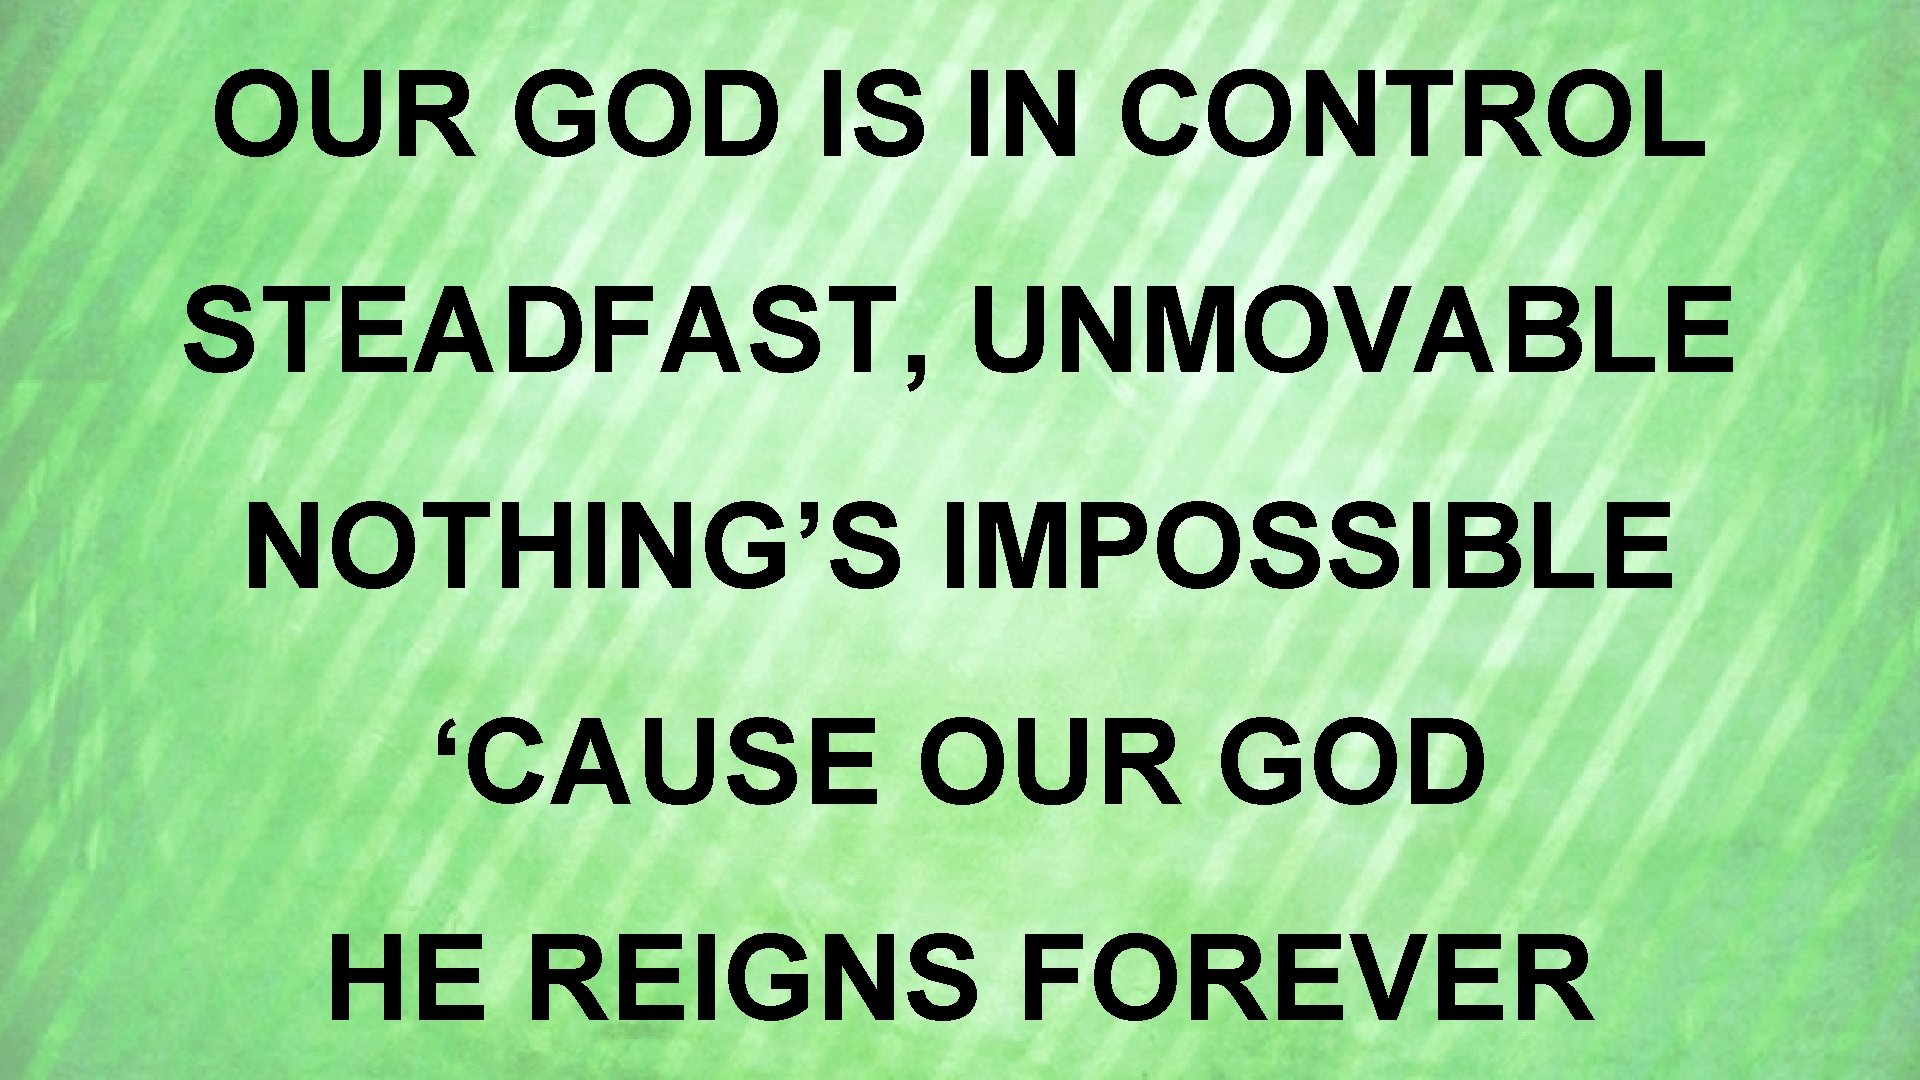 OUR GOD IS IN CONTROL STEADFAST, UNMOVABLE NOTHING’S IMPOSSIBLE ‘CAUSE OUR GOD HE REIGNS